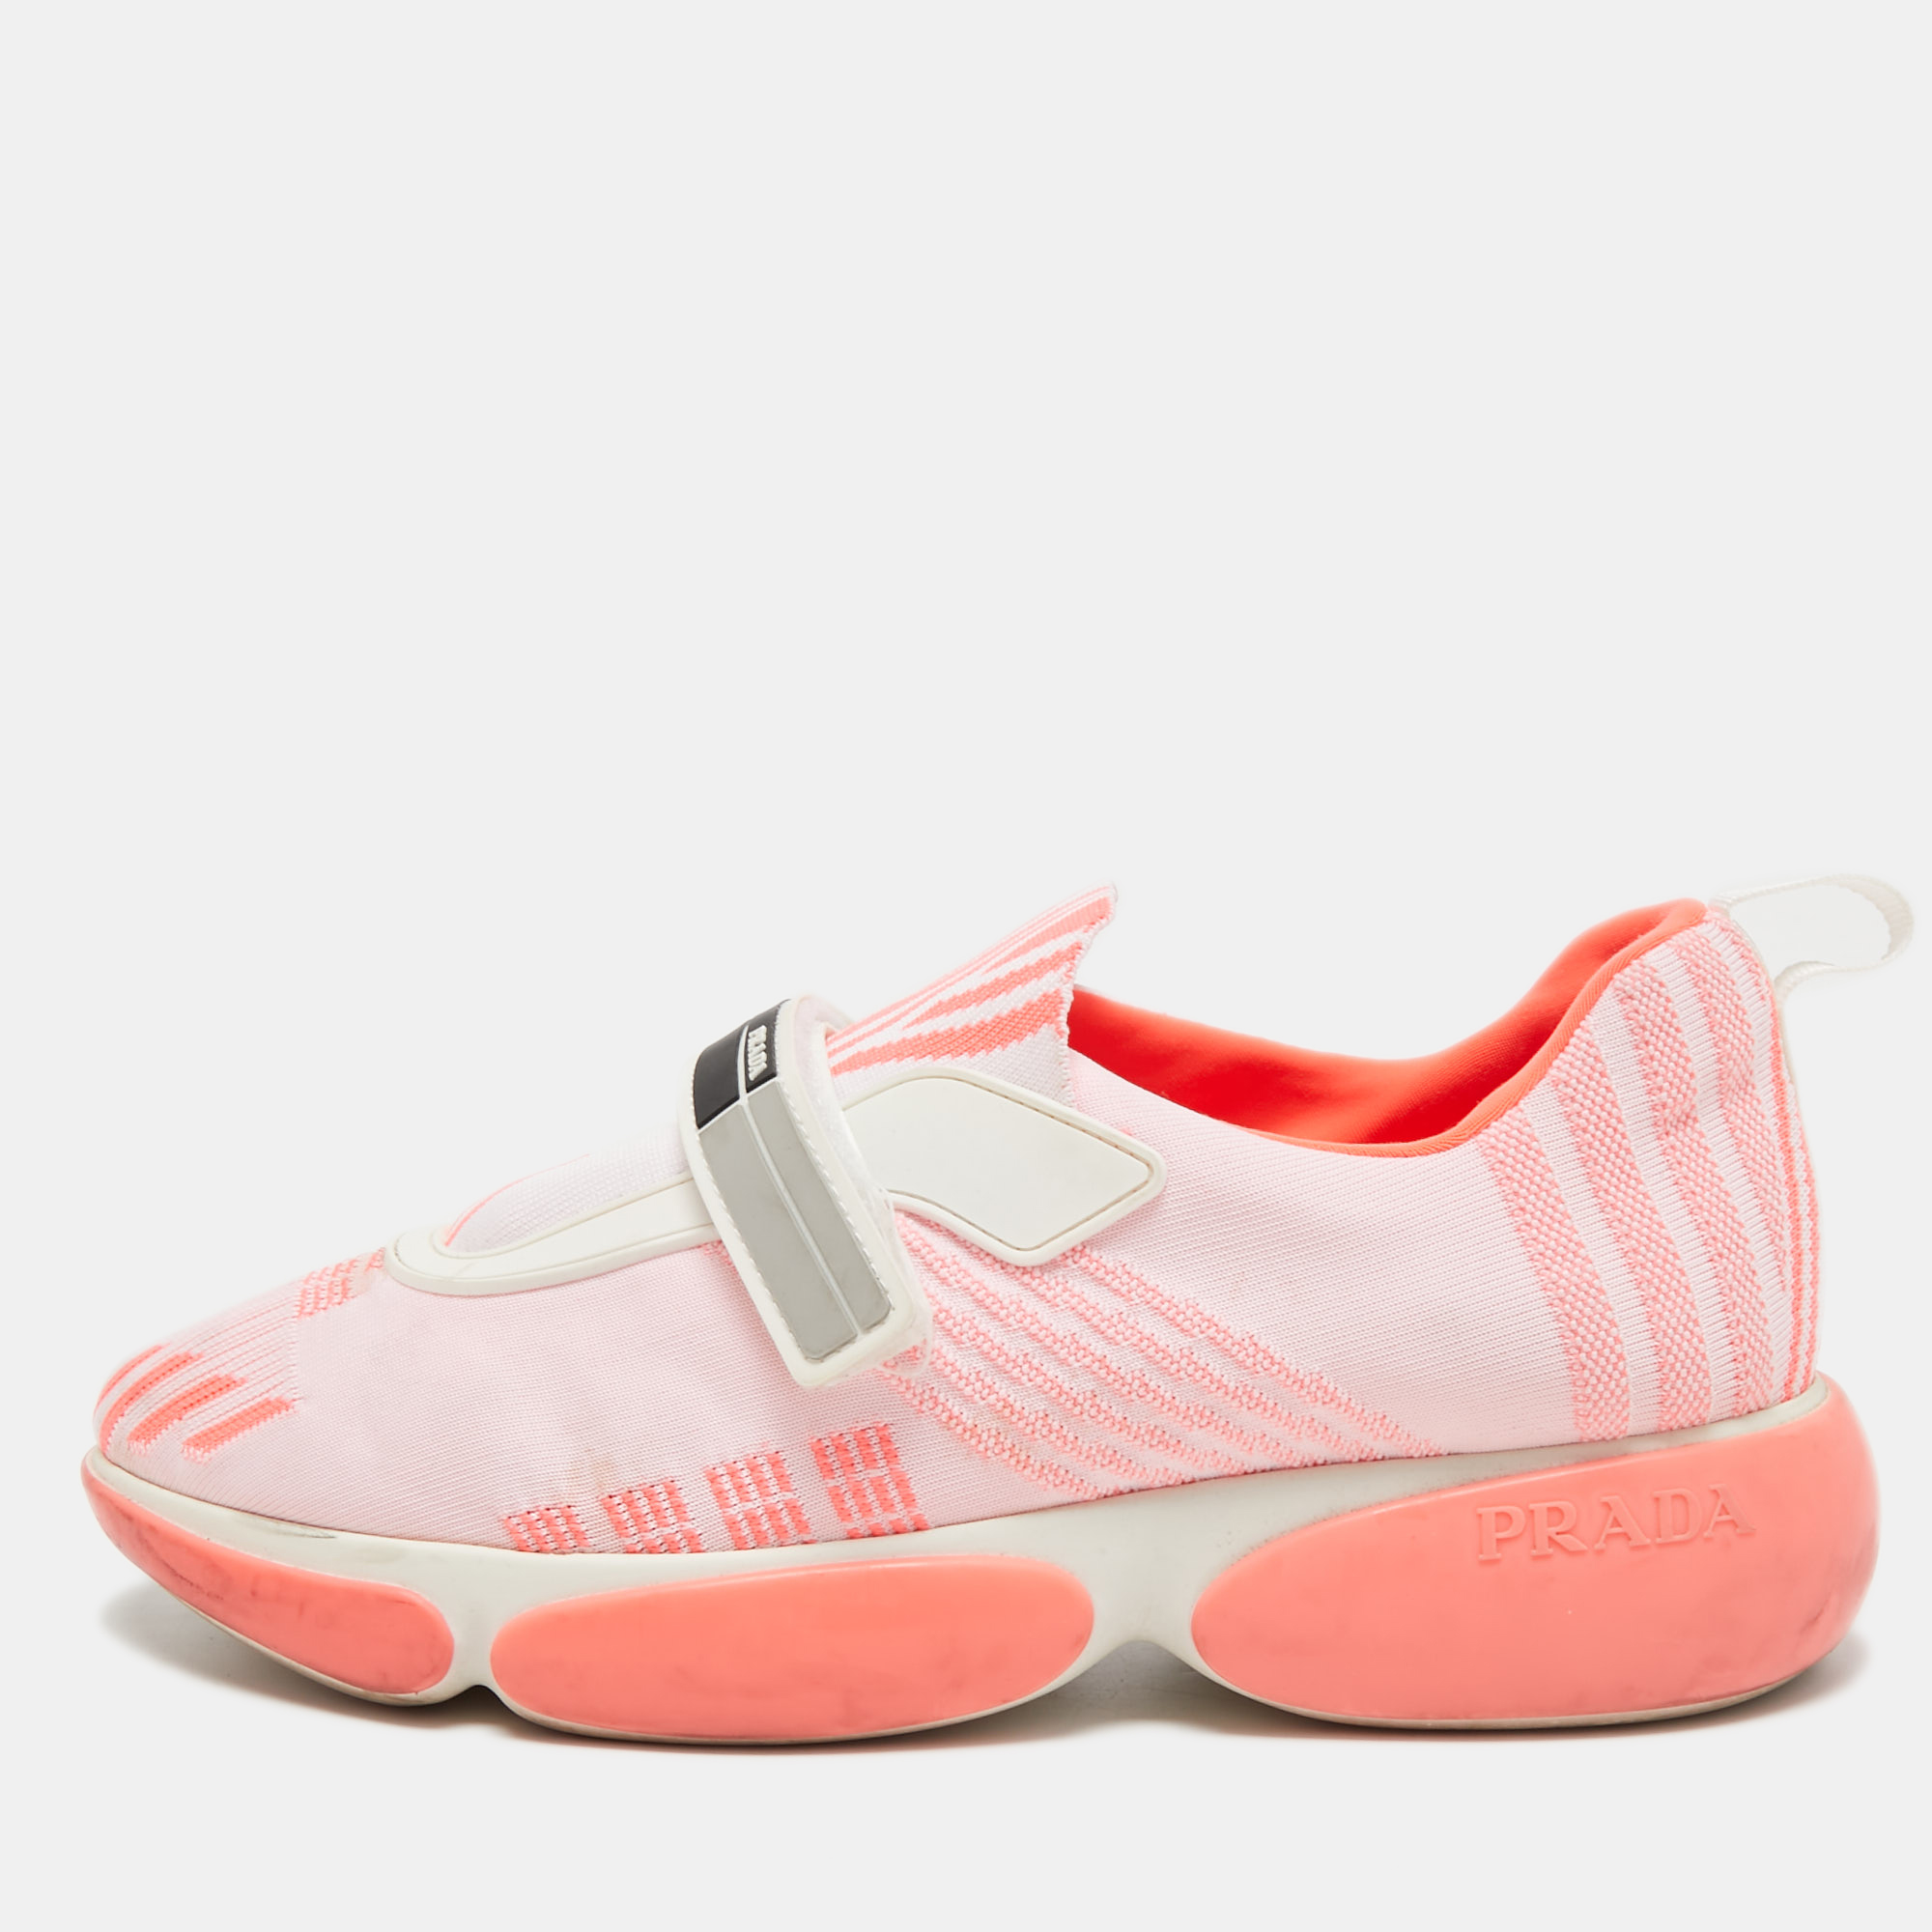 Pre-owned Prada Pink Fabric Slip On Sneakers Size 38